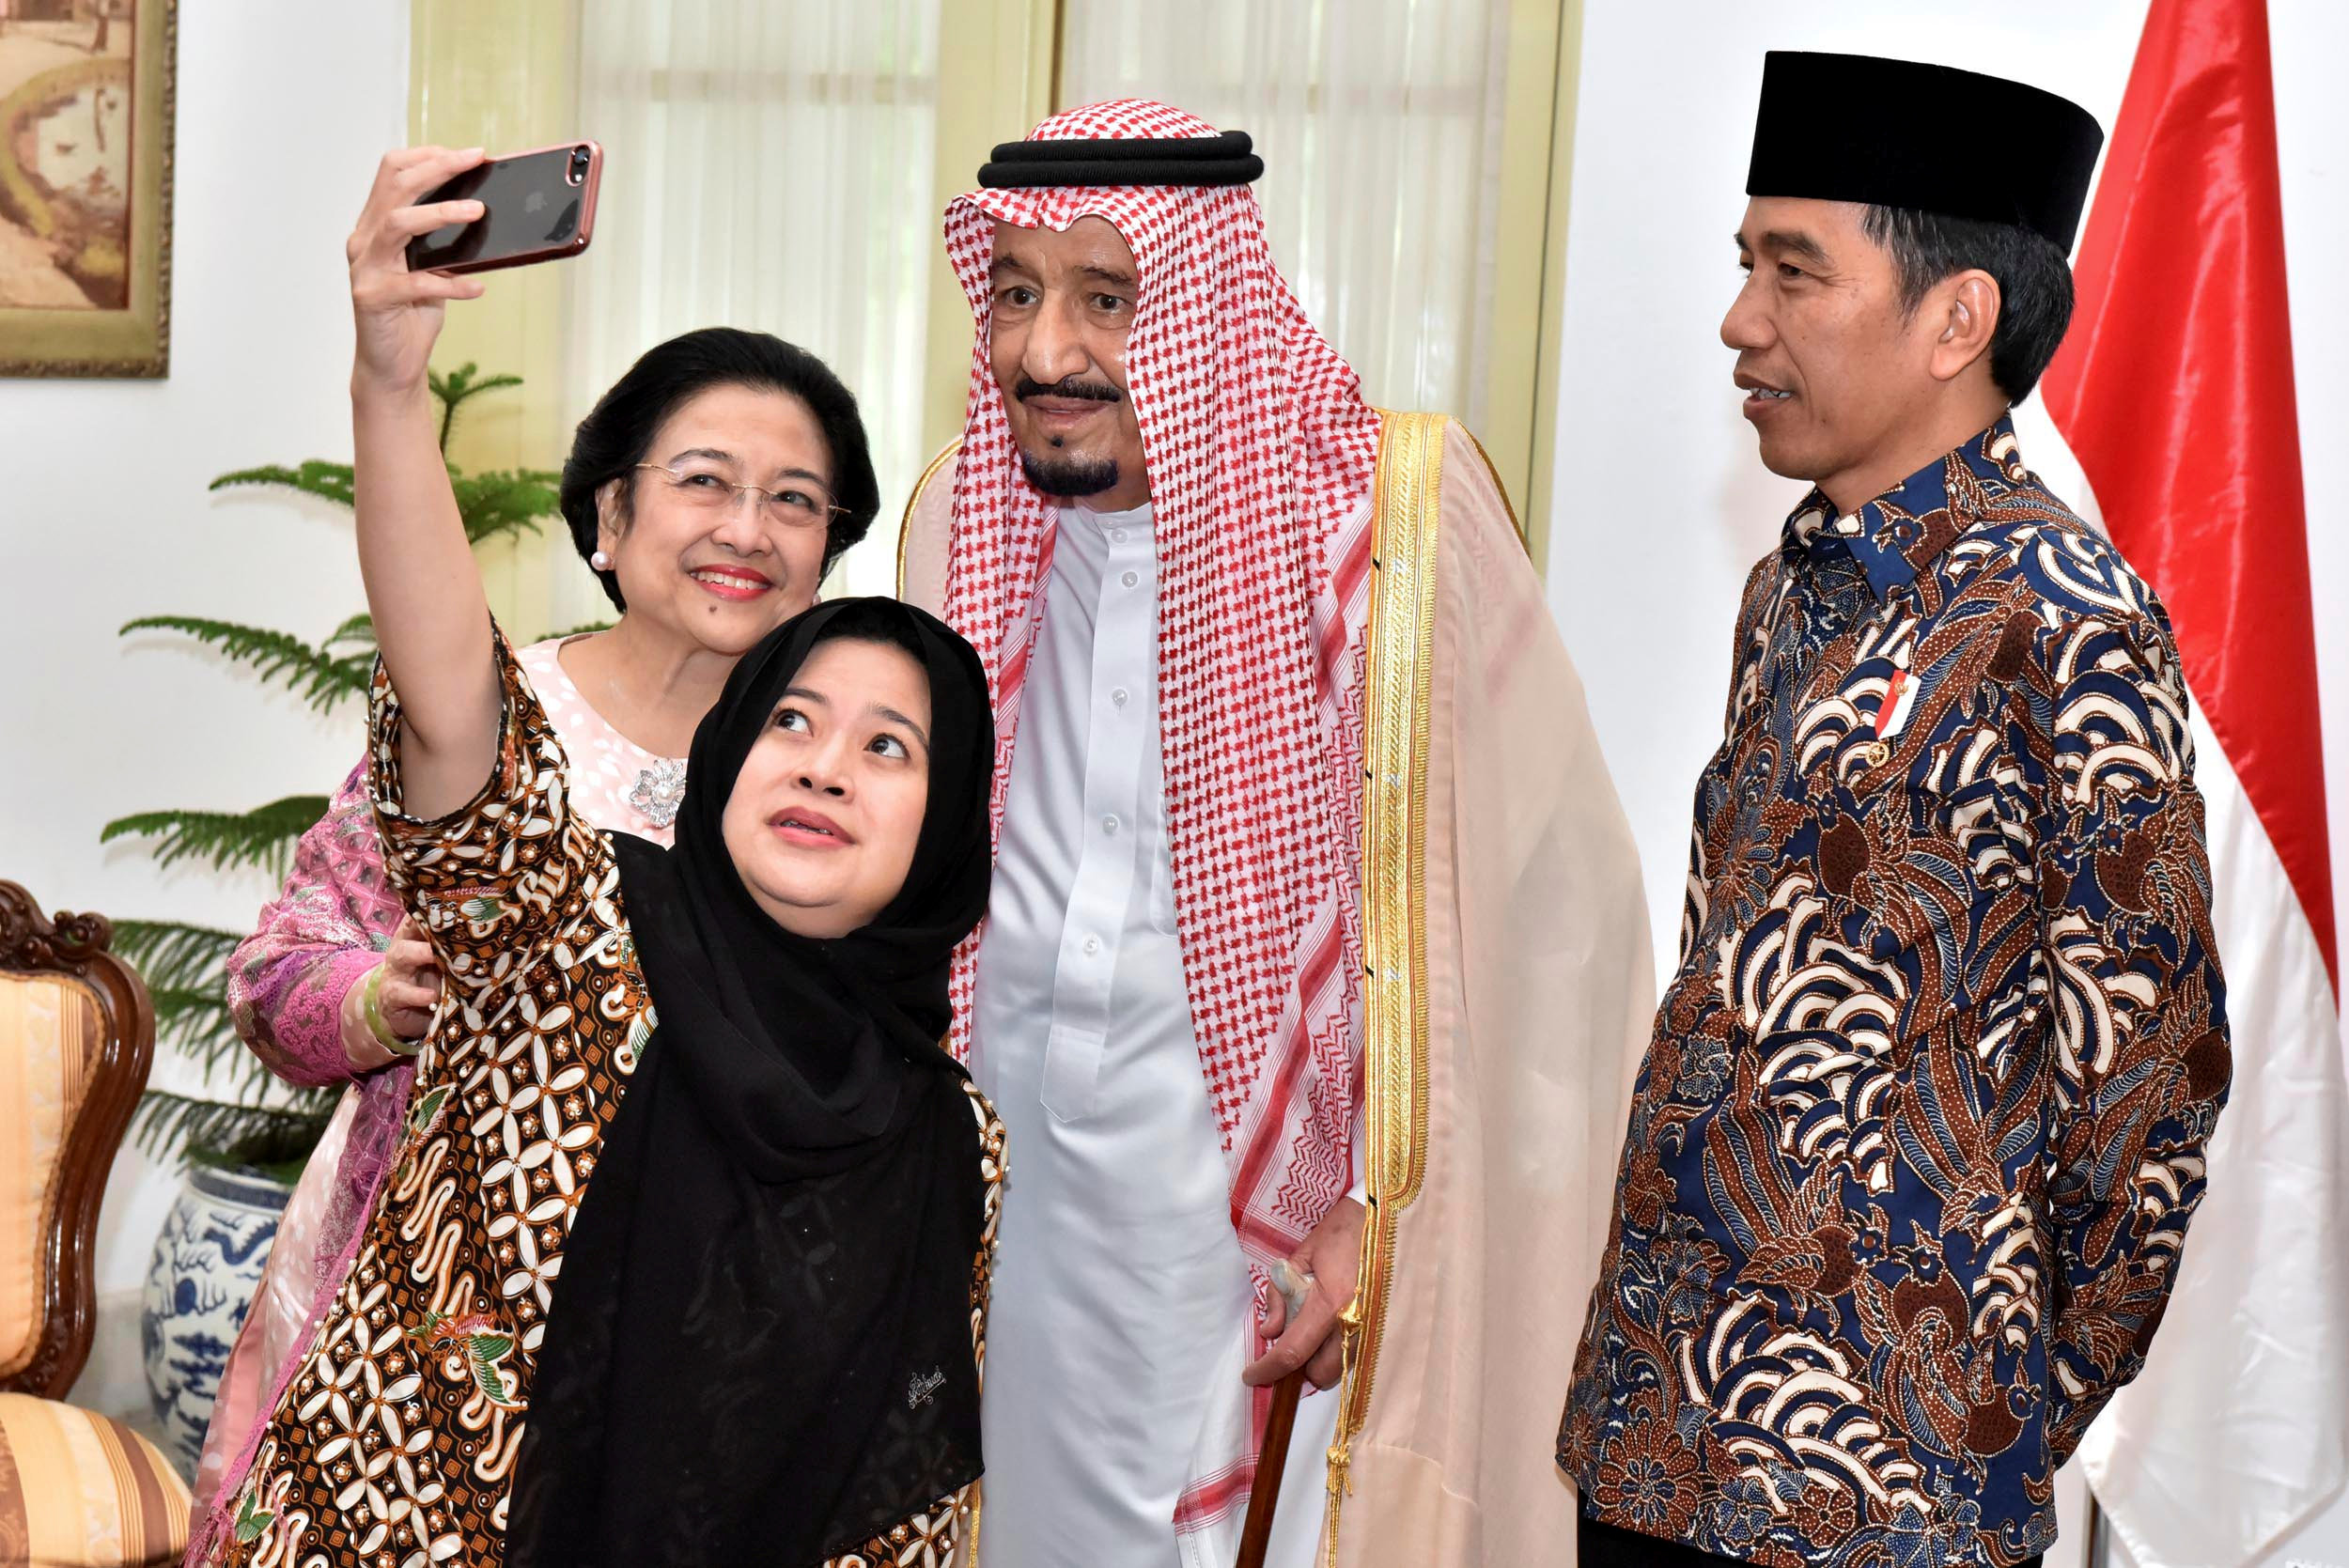 Indonesian President Joko Widodo (R) watches as former president Megawati Sukarnoputri and her daughter Puan Maharani, a minister in his cabinet, take a selfie with Saudi Arabia's King Salman (C) at the presidential palace in Jakarta, Indonesia March 2, 2017 in this photo taken by Presidential Palace Photographer. Presidential Palace Photographer/Agus Suparto/Handout via REUTERS